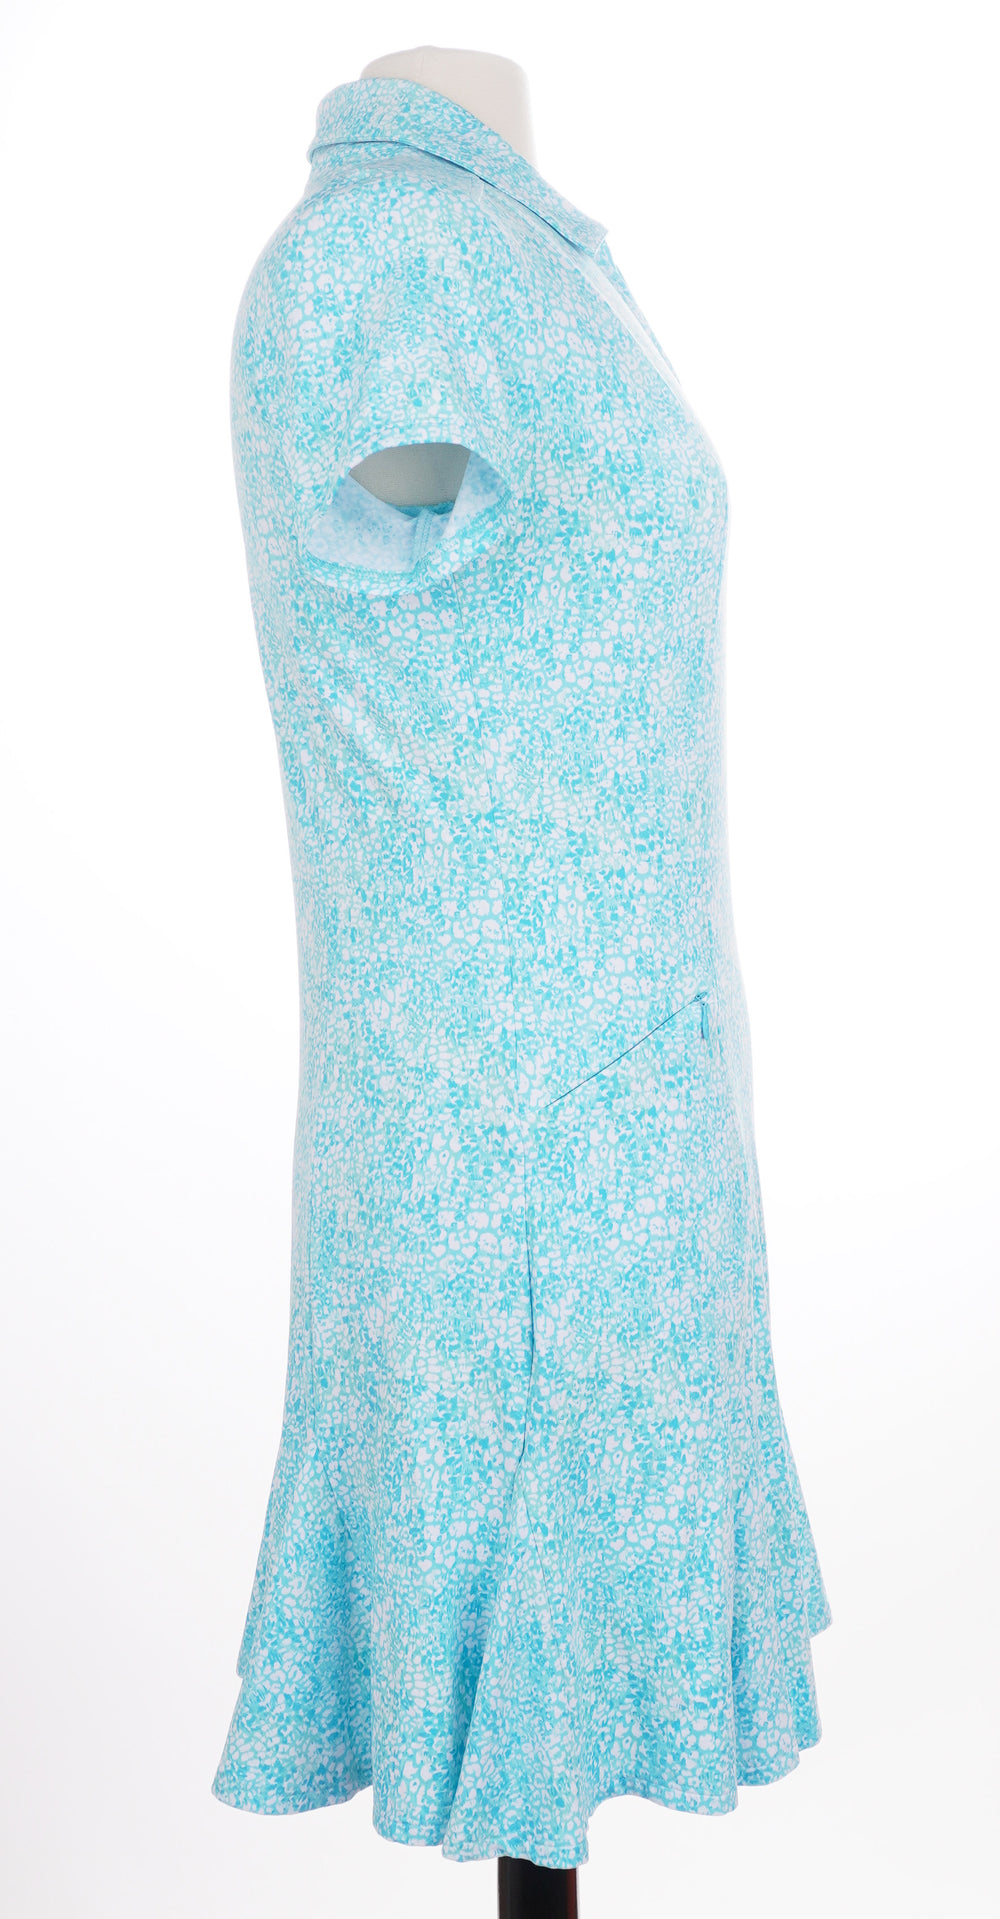 IBKUL Abstract Skin Print Short Sleeve Dress - Turquoise - Size Small - Skorzie